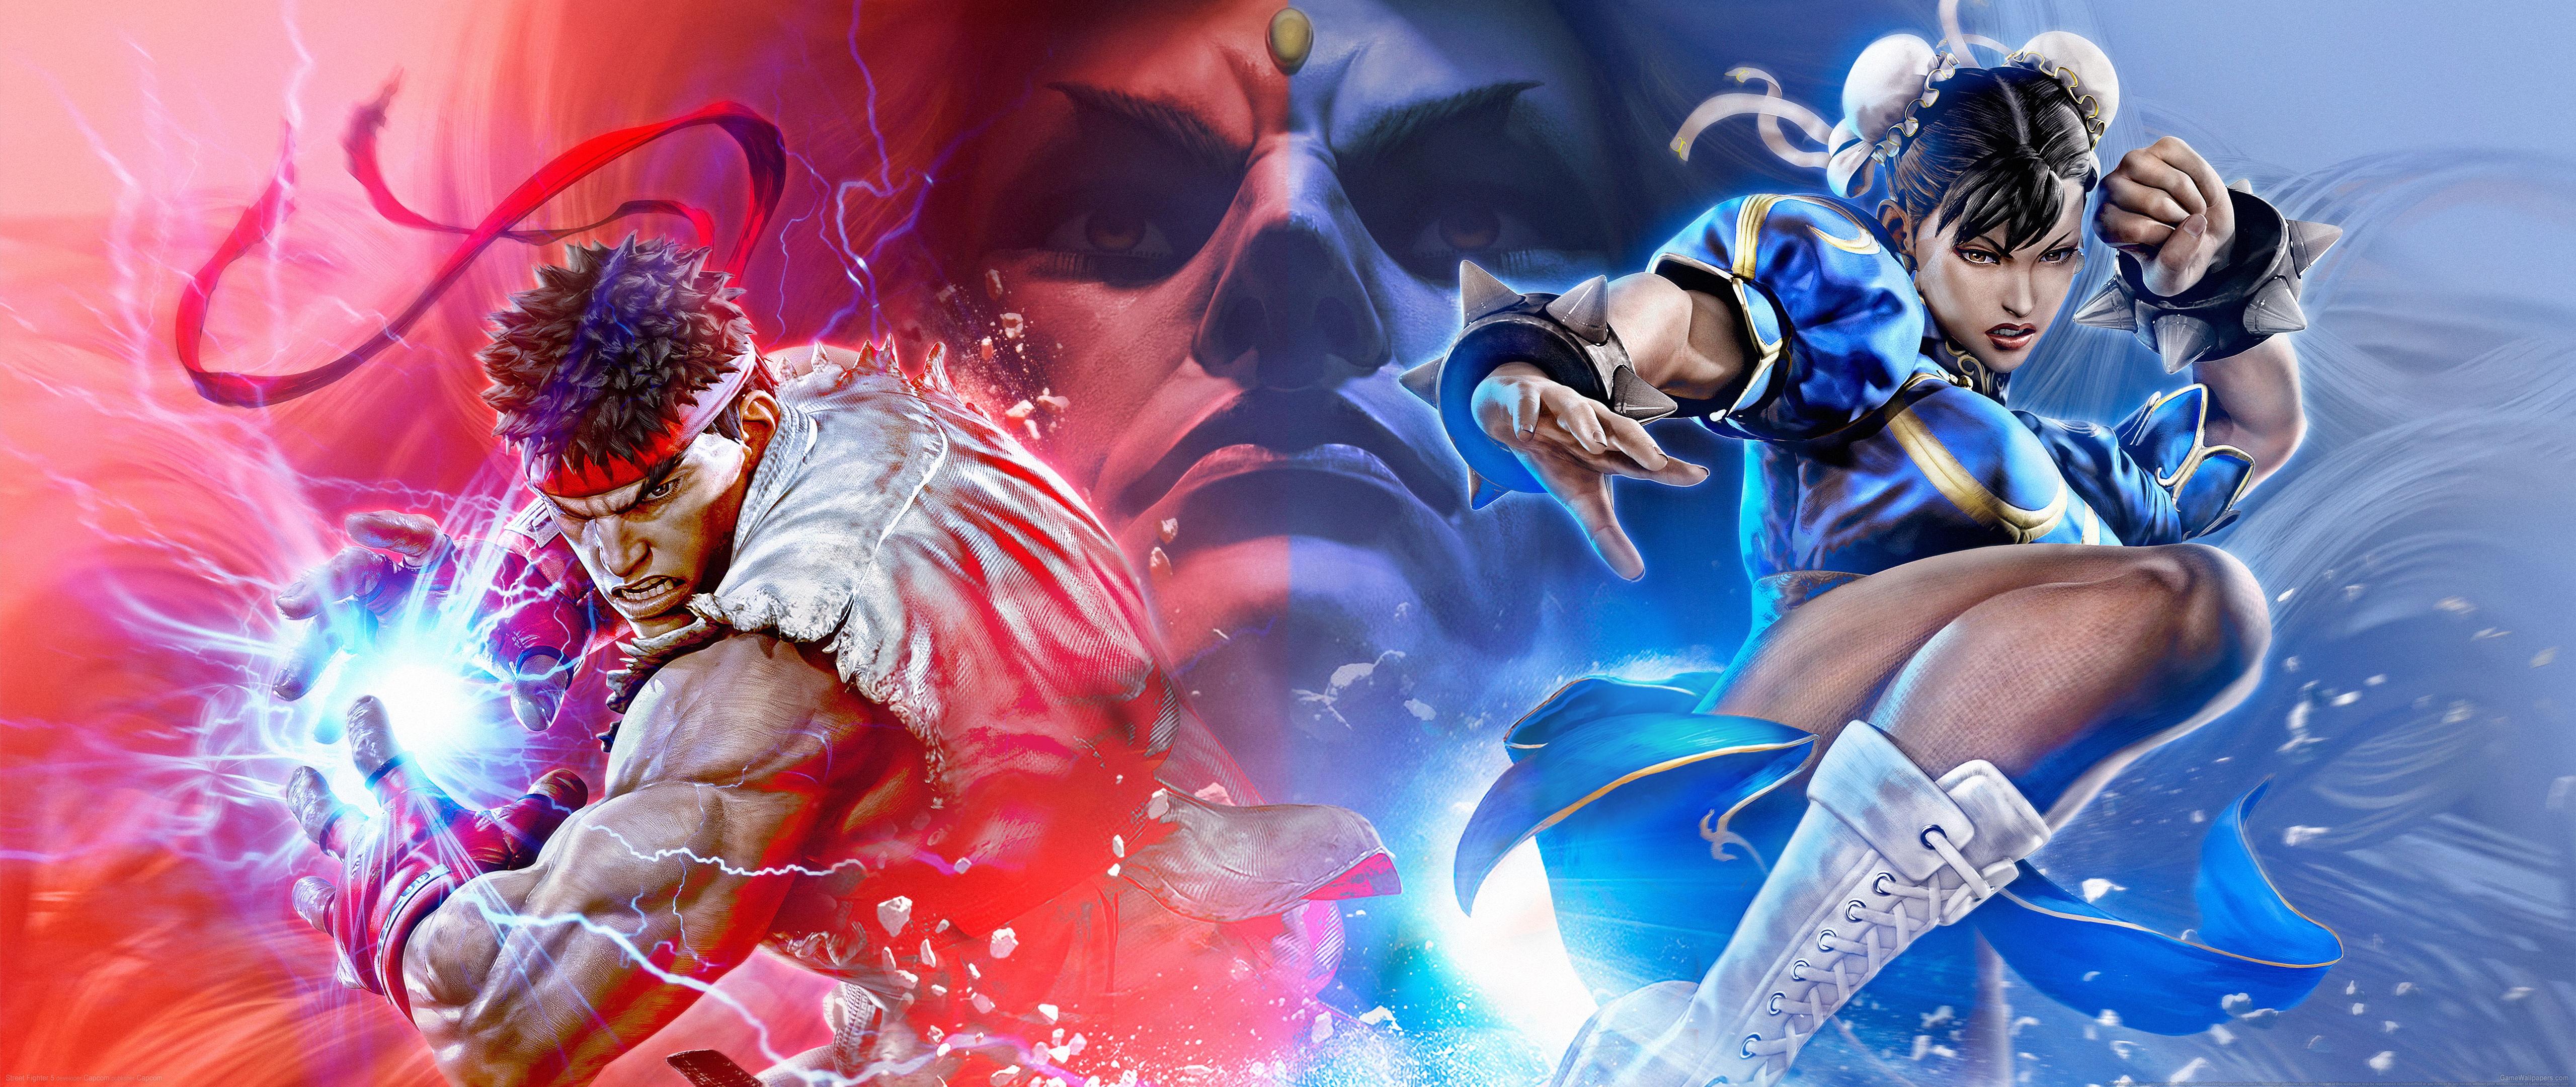 Street Fighter 5 5120x2160 wallpaper or background 08